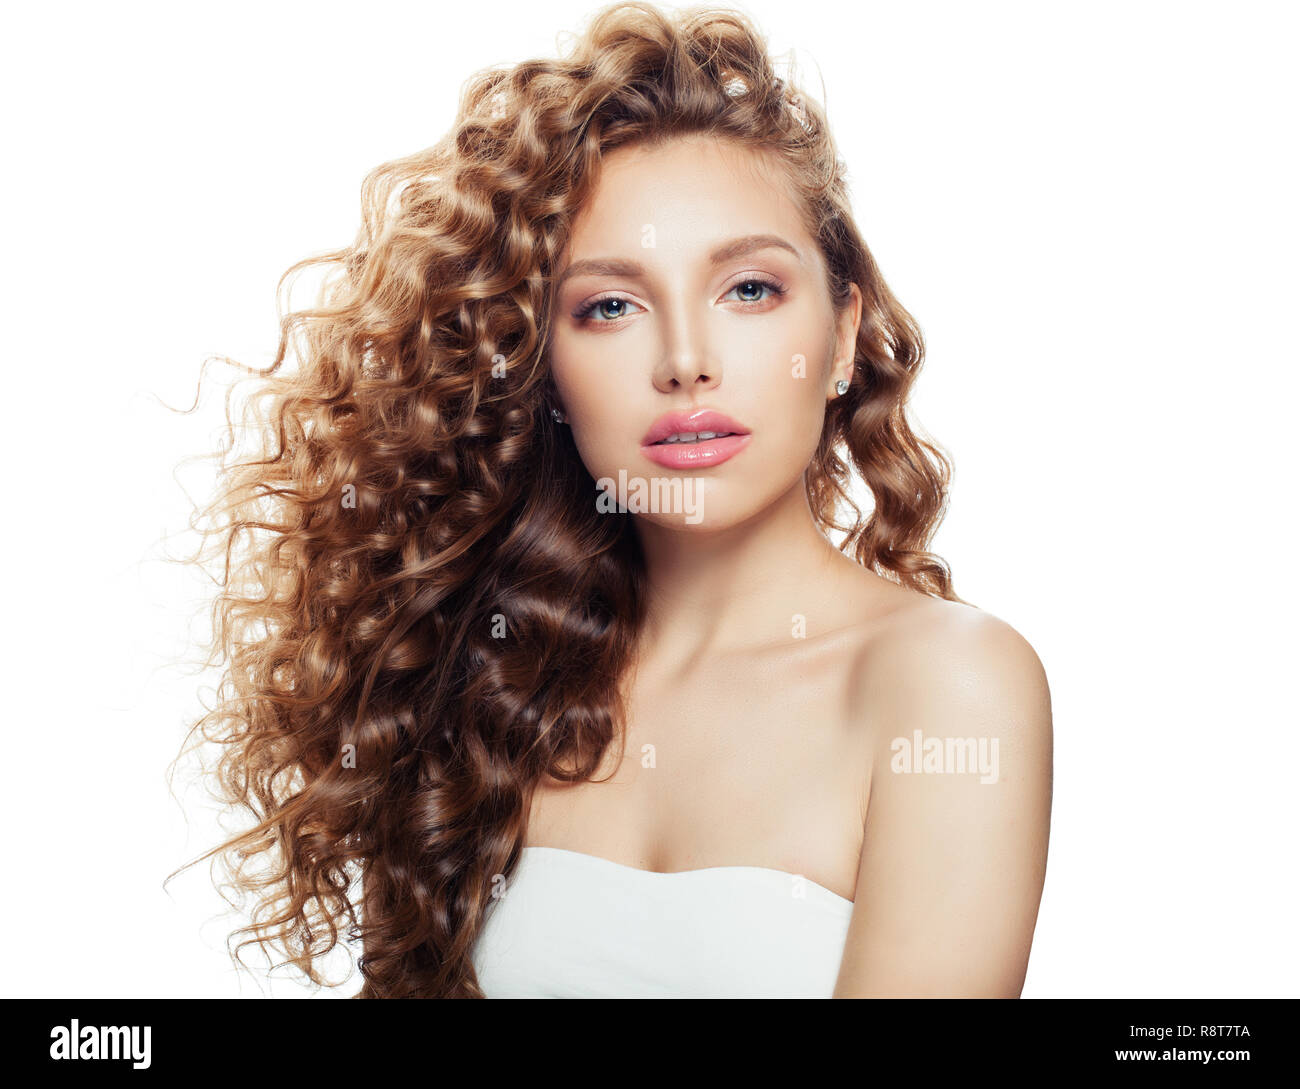 Young woman with healthy wavy hair and clear skin isolated on white Stock Photo